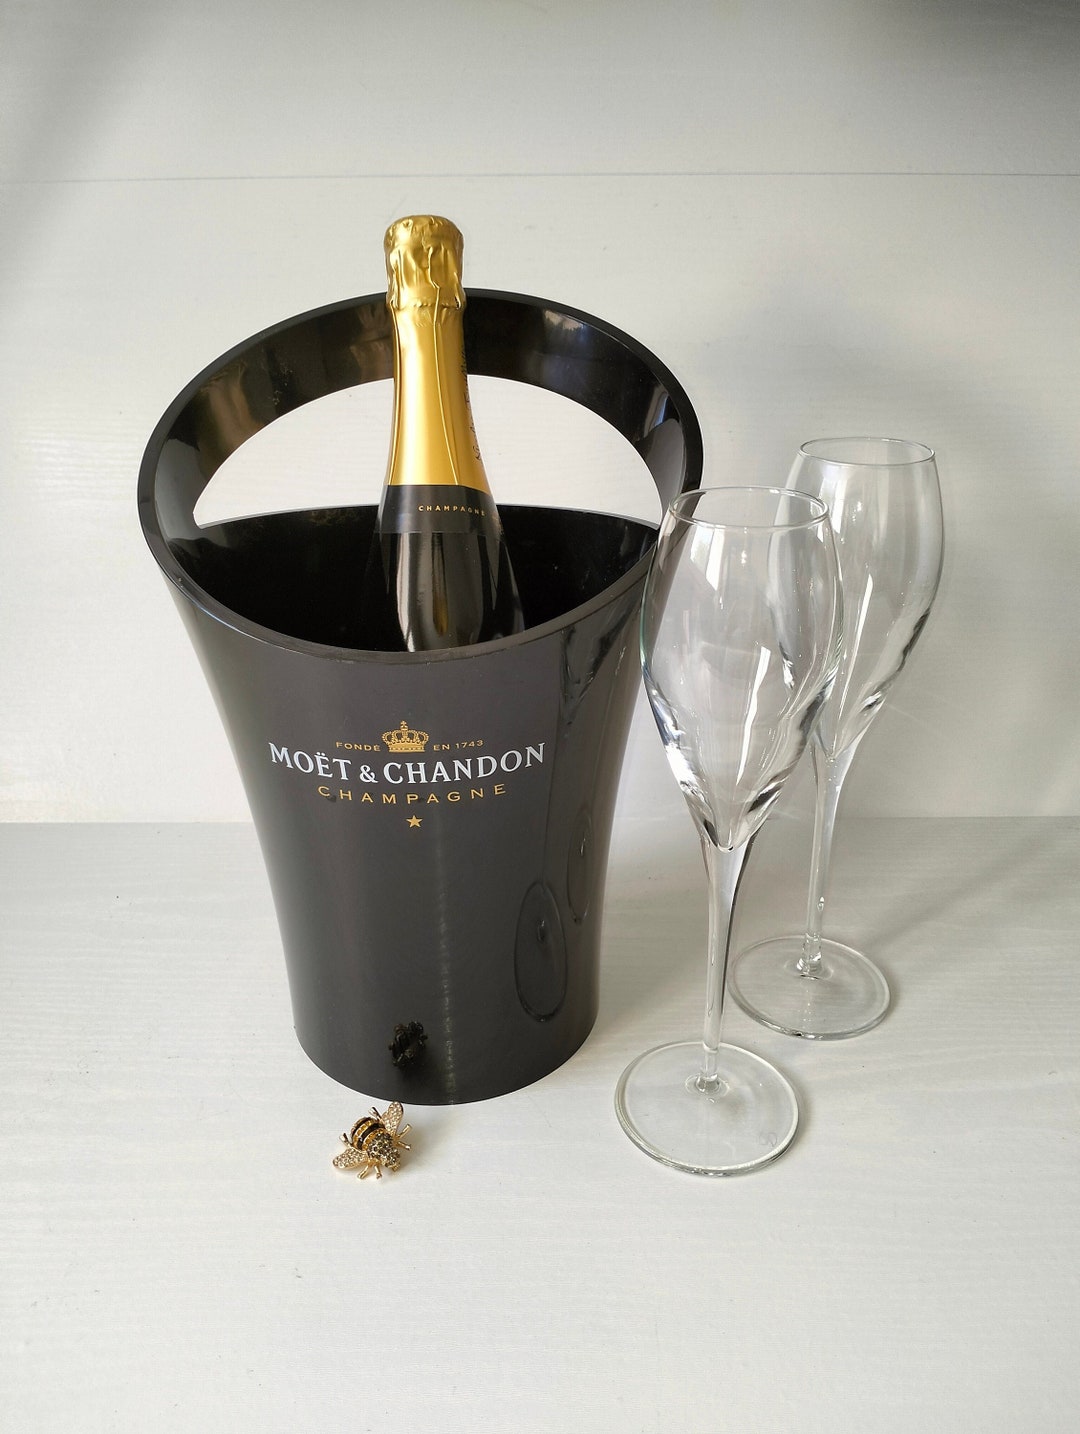 Top Hat Moet & Chandon Champagne Cooler. Ice Bucket with French Champagne  Advertising.